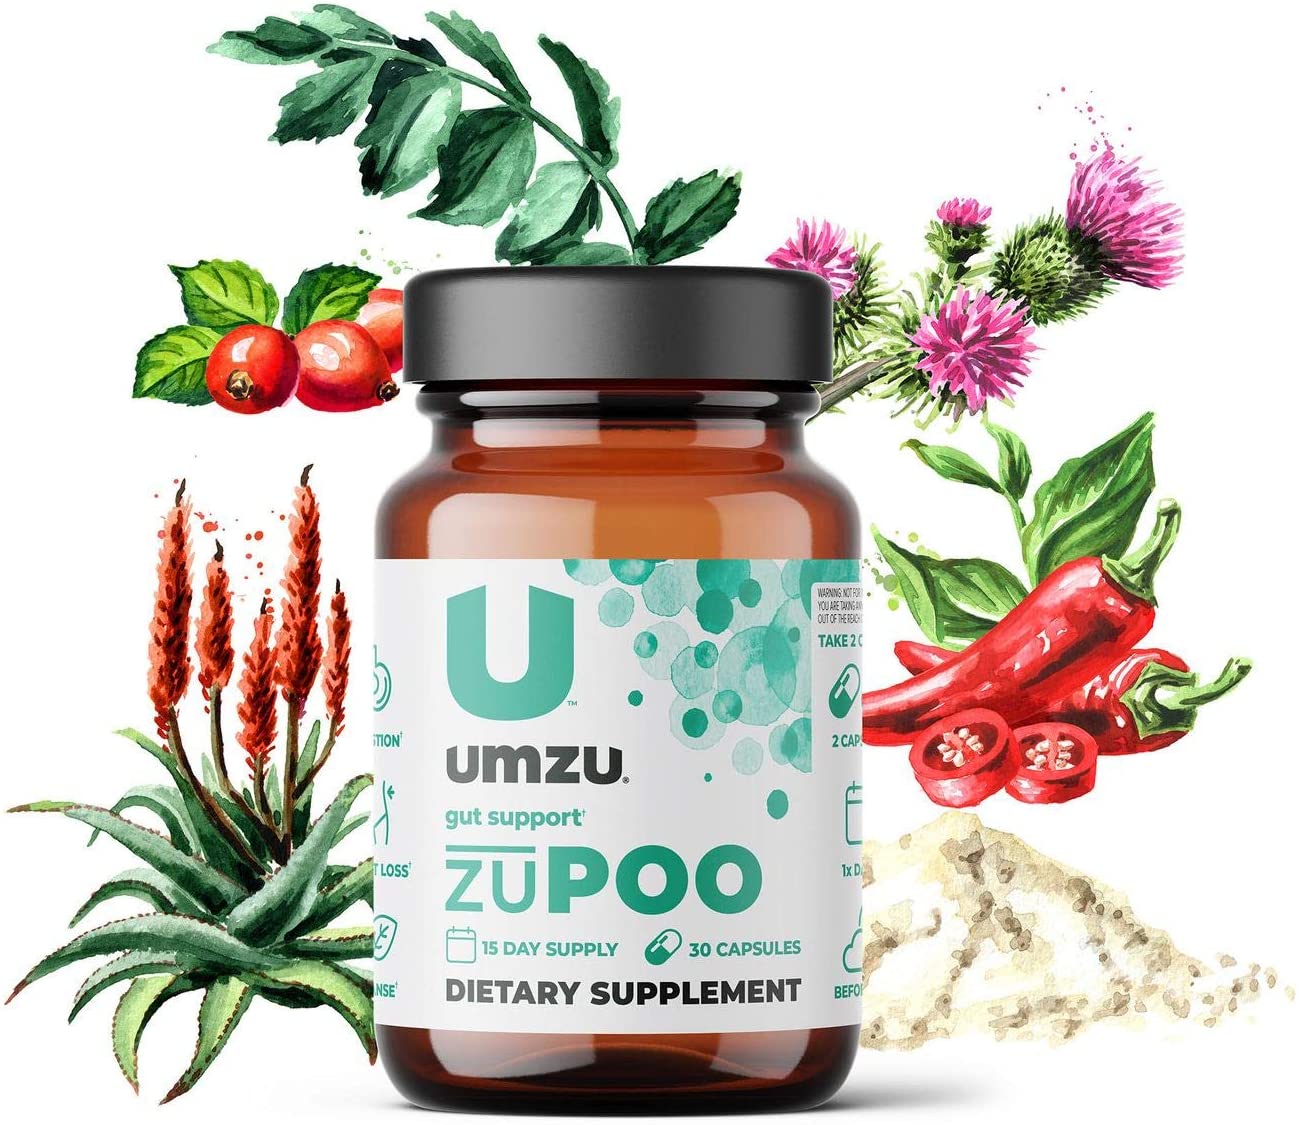 Umzu zuPOO Review, Scam or Legit? The Truth Exposed